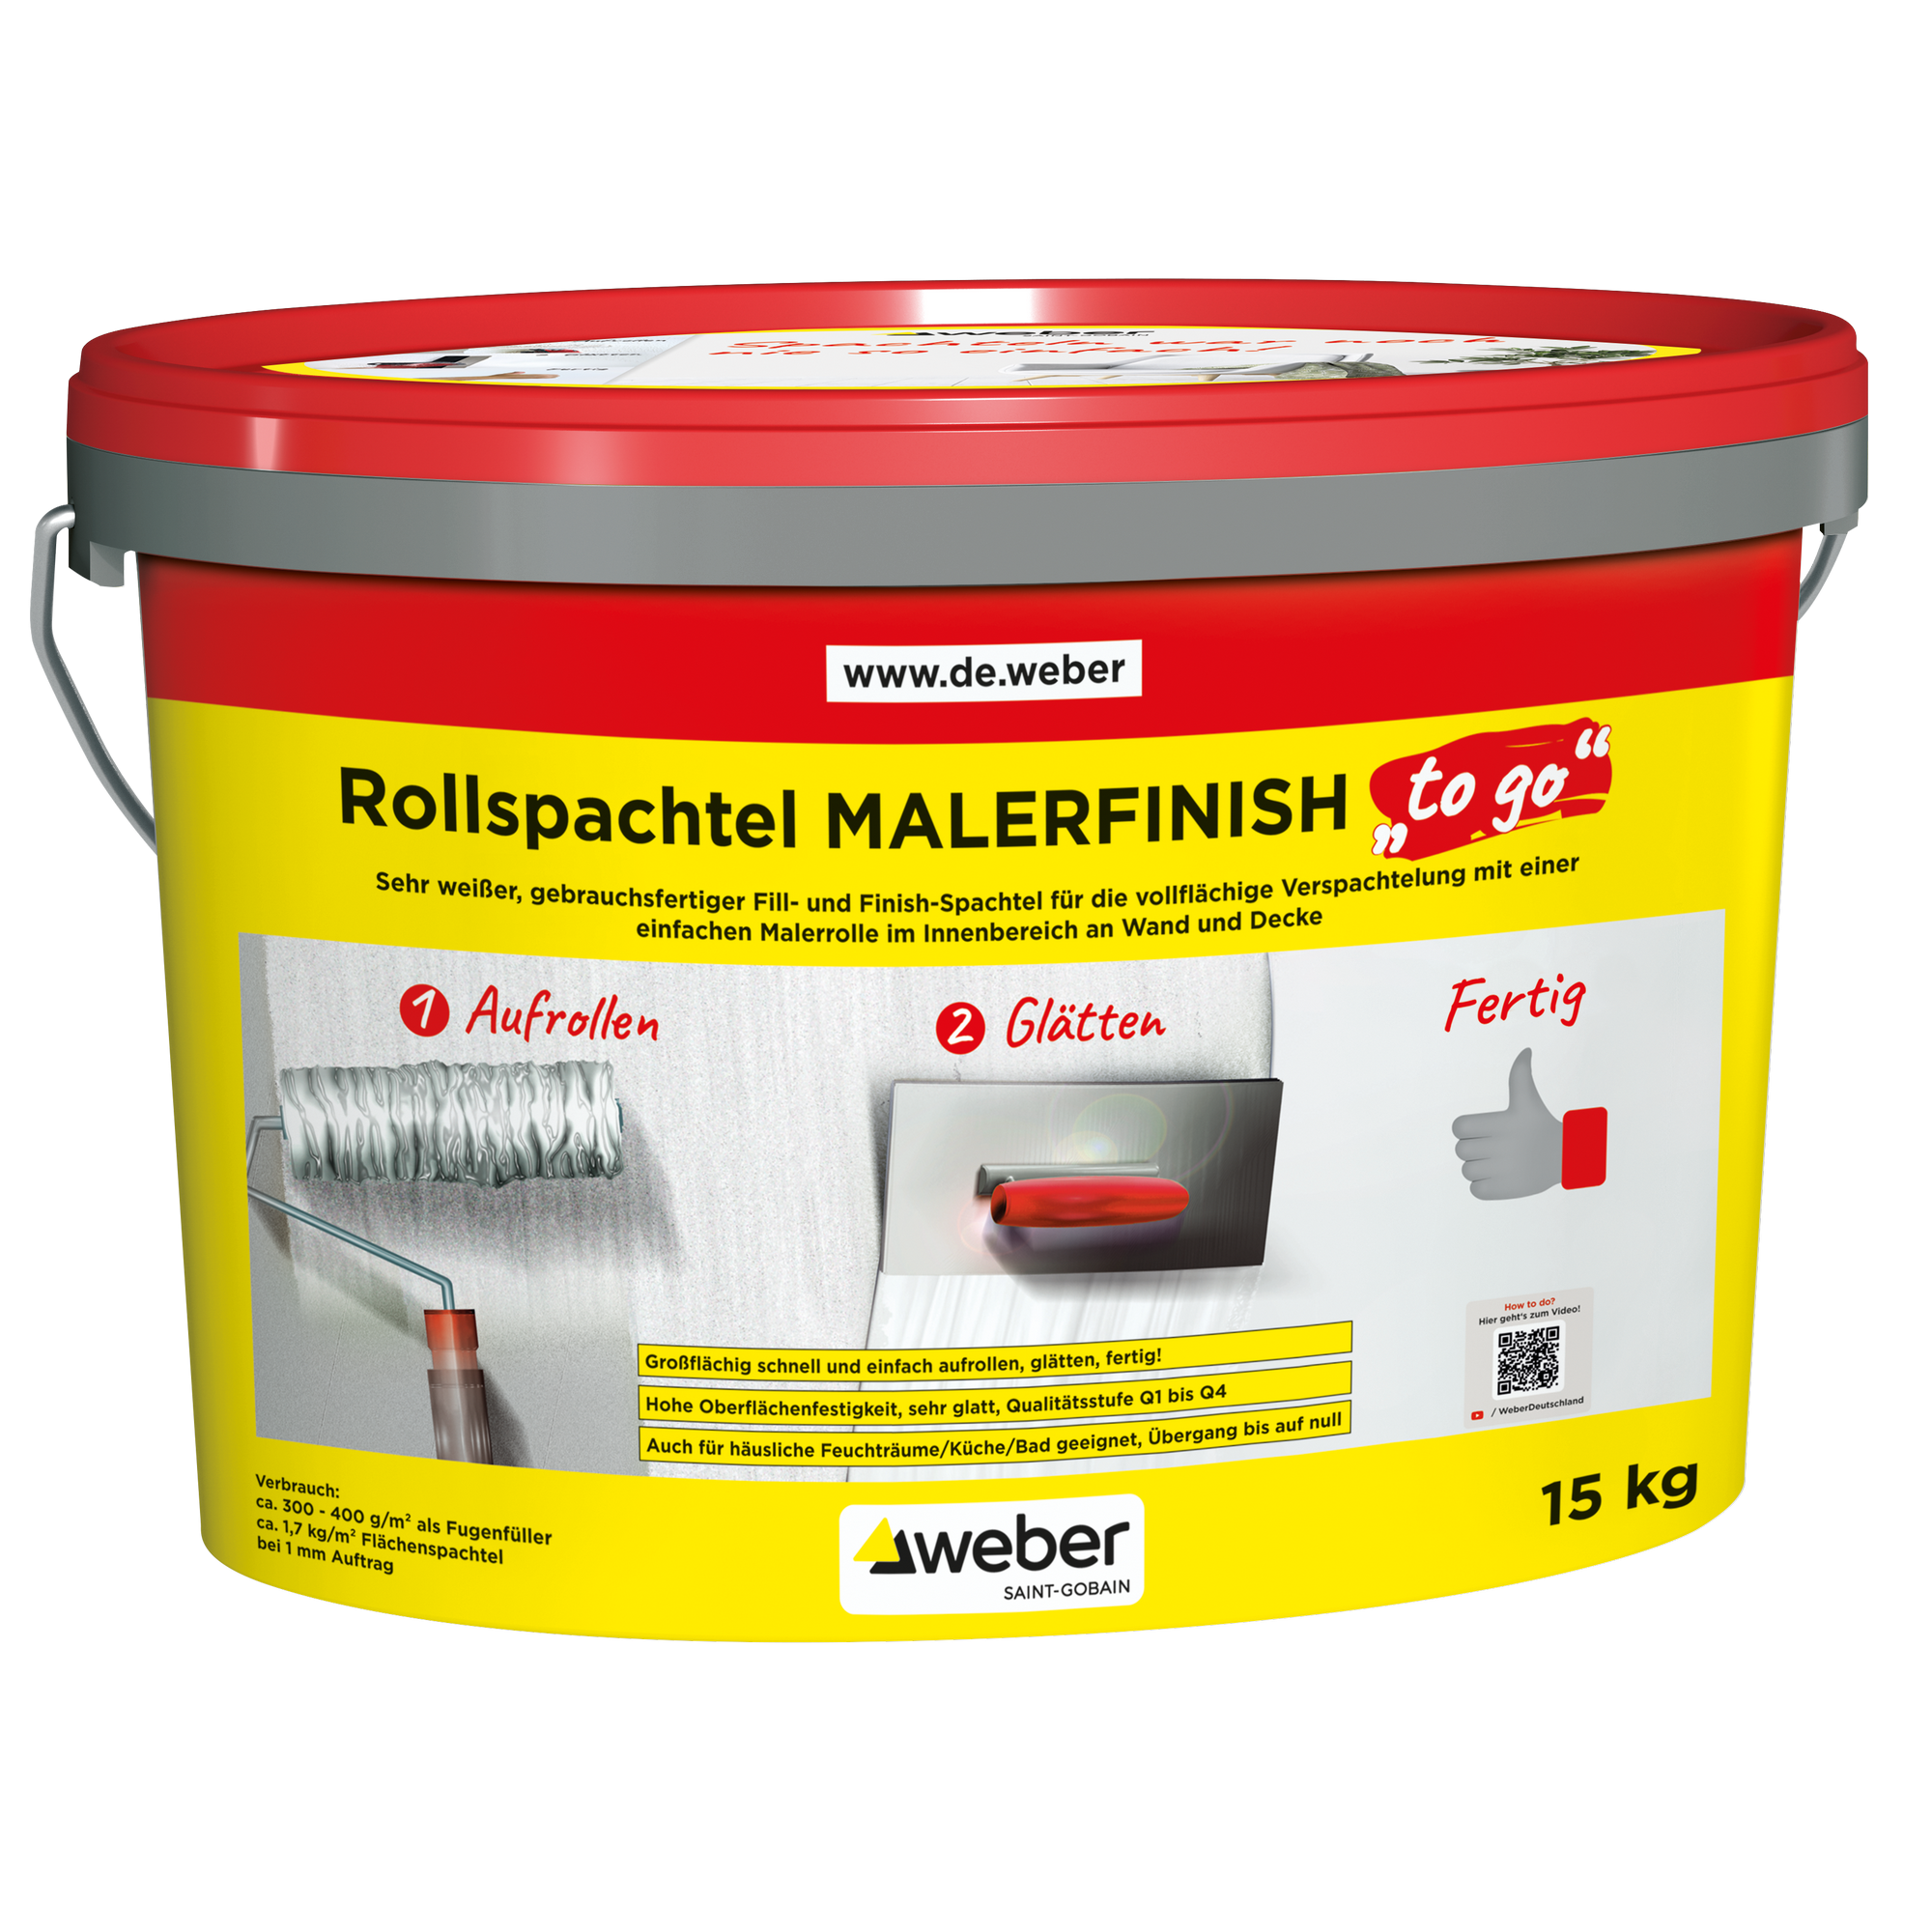 Rollspachtel Malerfinish 'to go' 15 kg + product picture